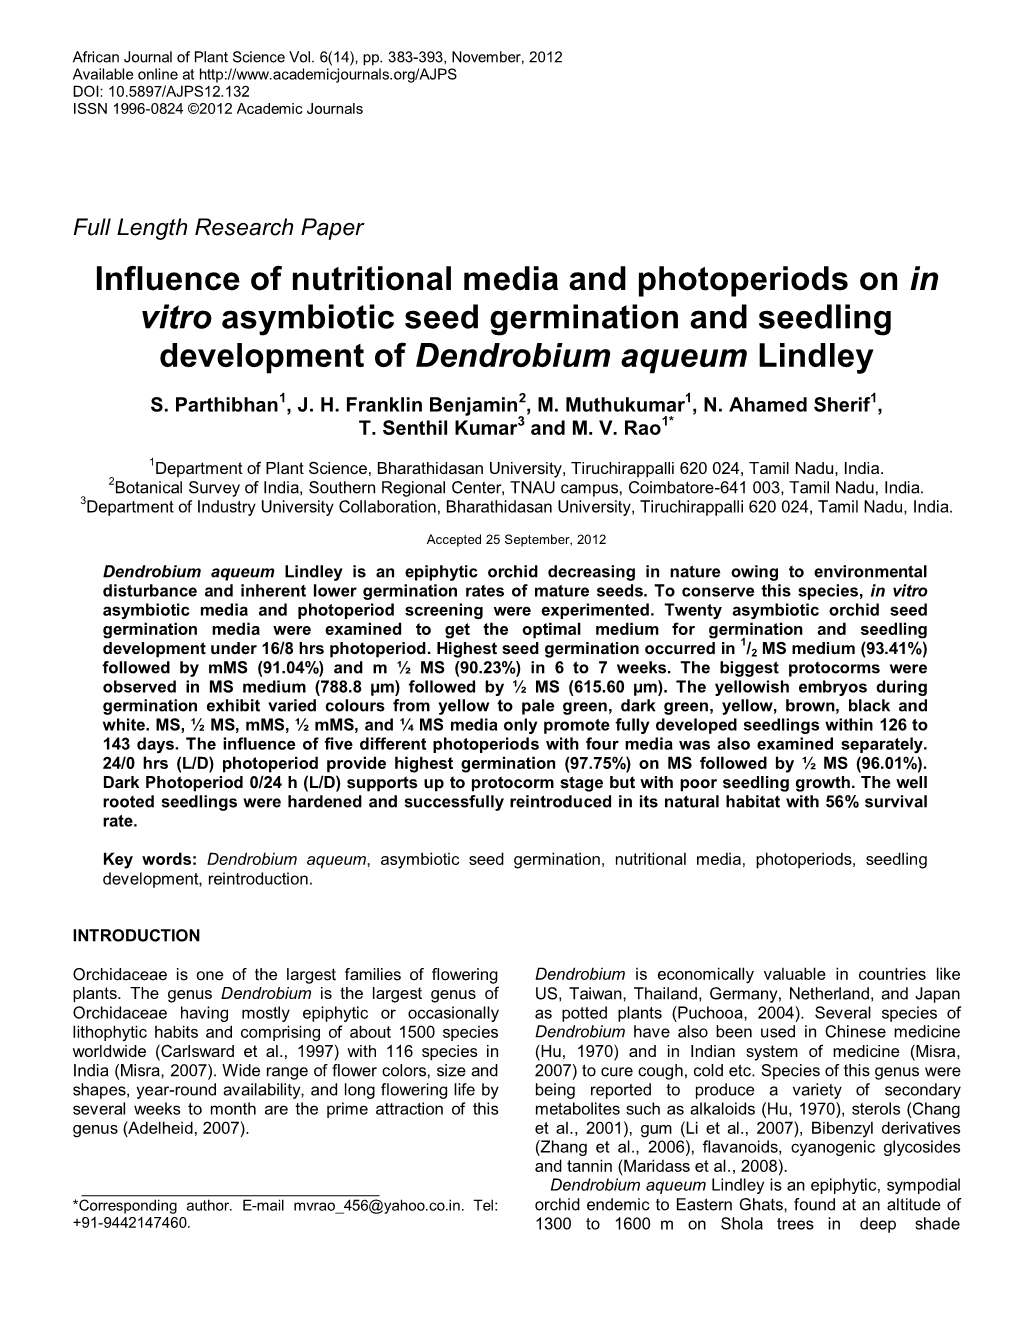 Influence of Nutritional Media and Photoperiods on in Vitro Asymbiotic Seed Germination and Seedling Development of Dendrobium Aqueum Lindley